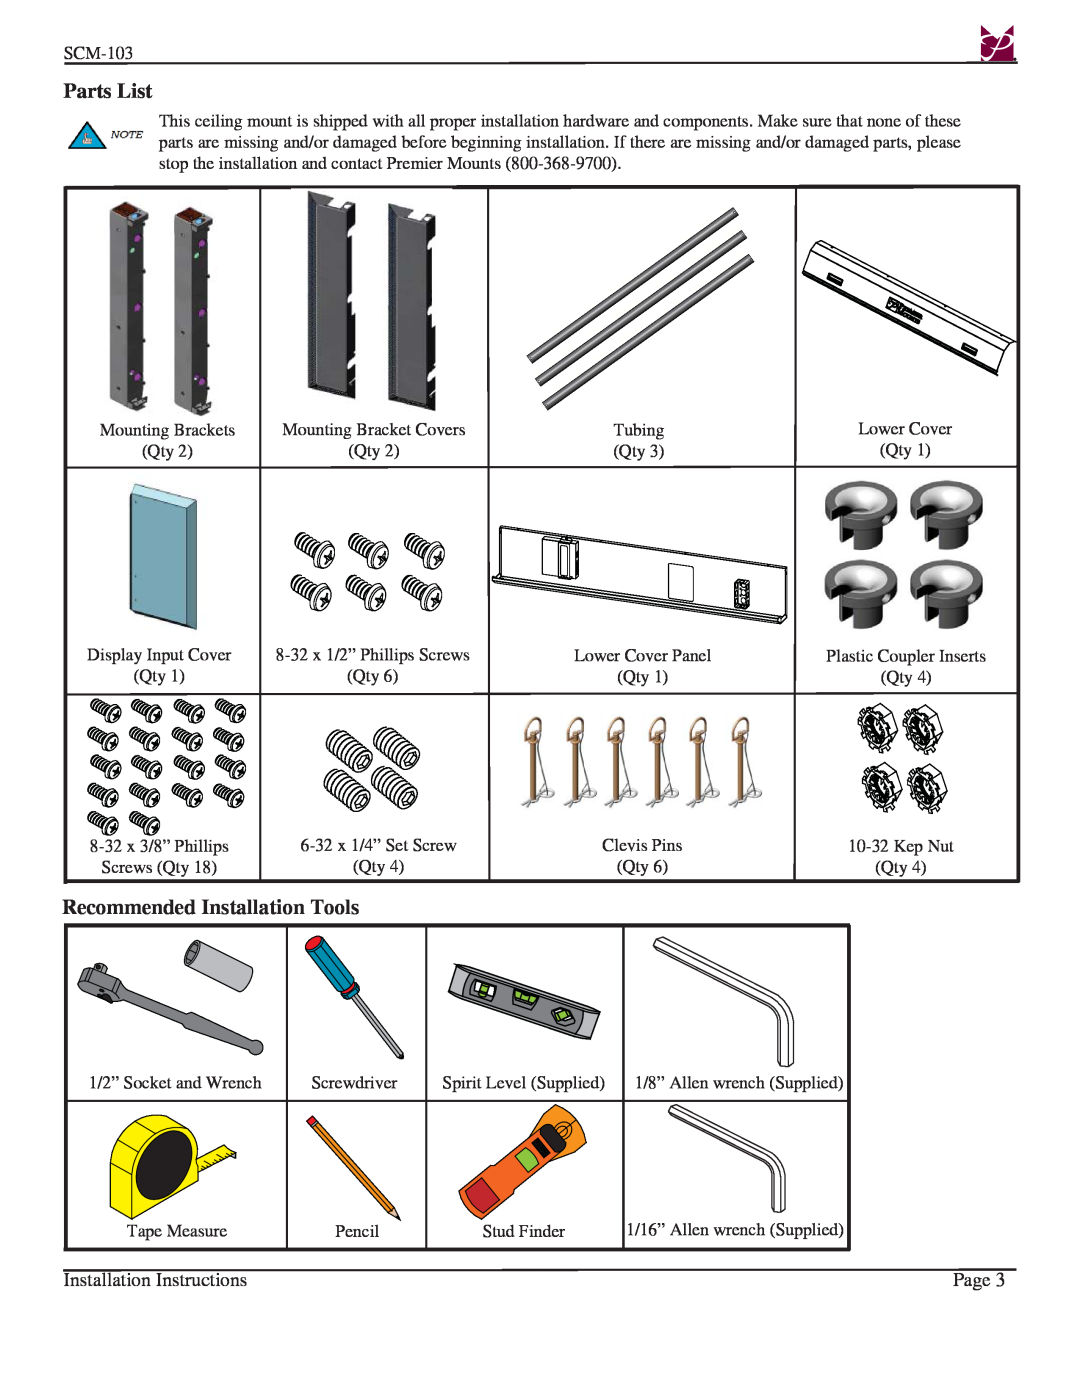 Premier Mounts SCM-103 Parts List, Recommended Installation Tools, Installation Instructions, Page 